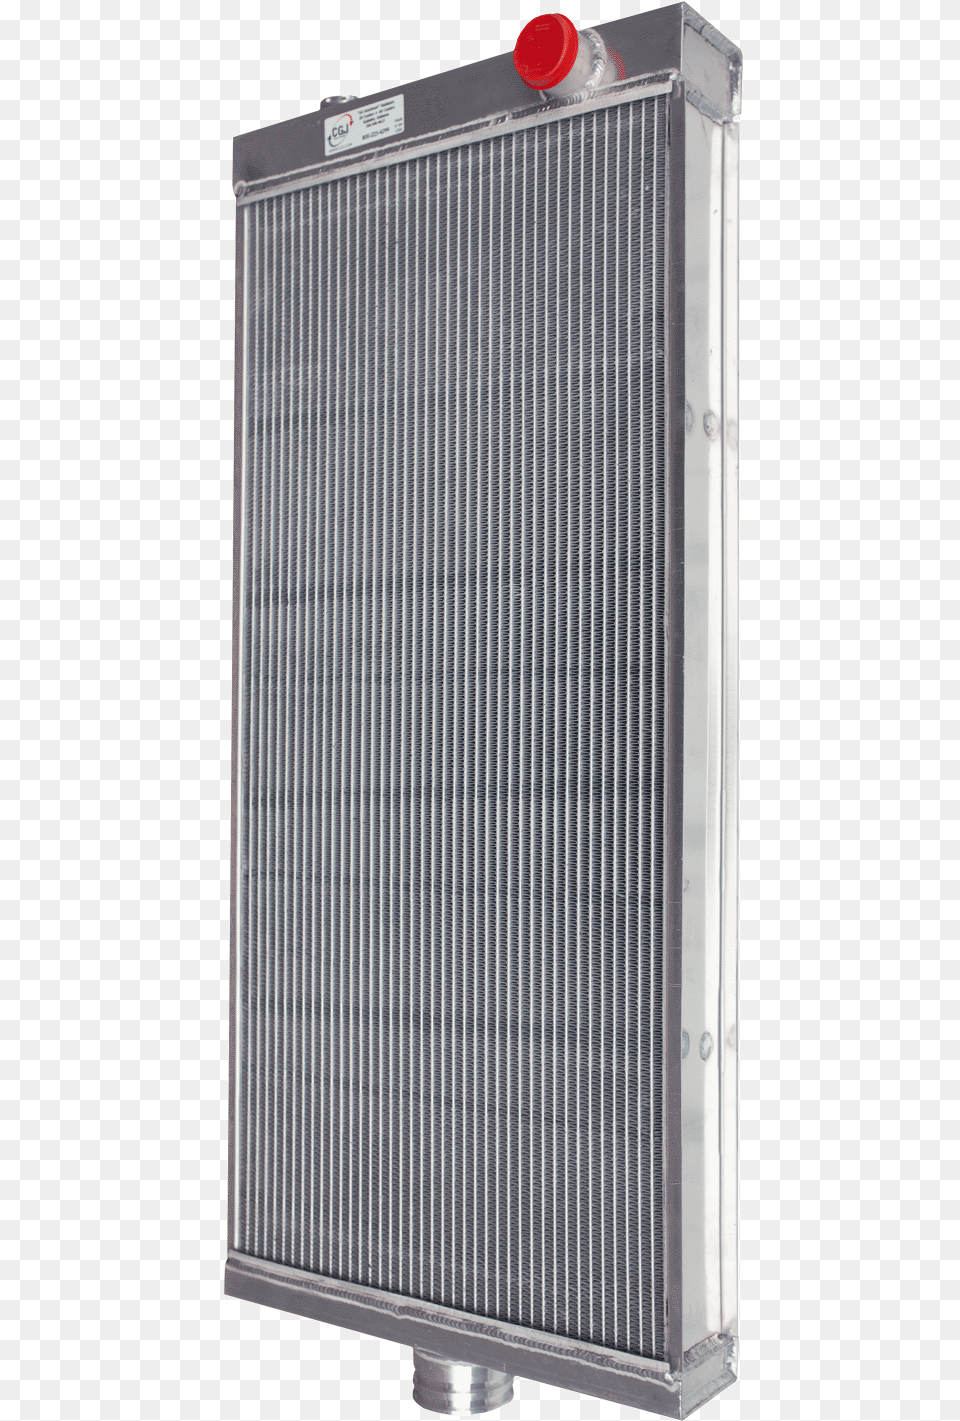 Air Charge Cooler Radiator, Appliance, Device, Electrical Device Png